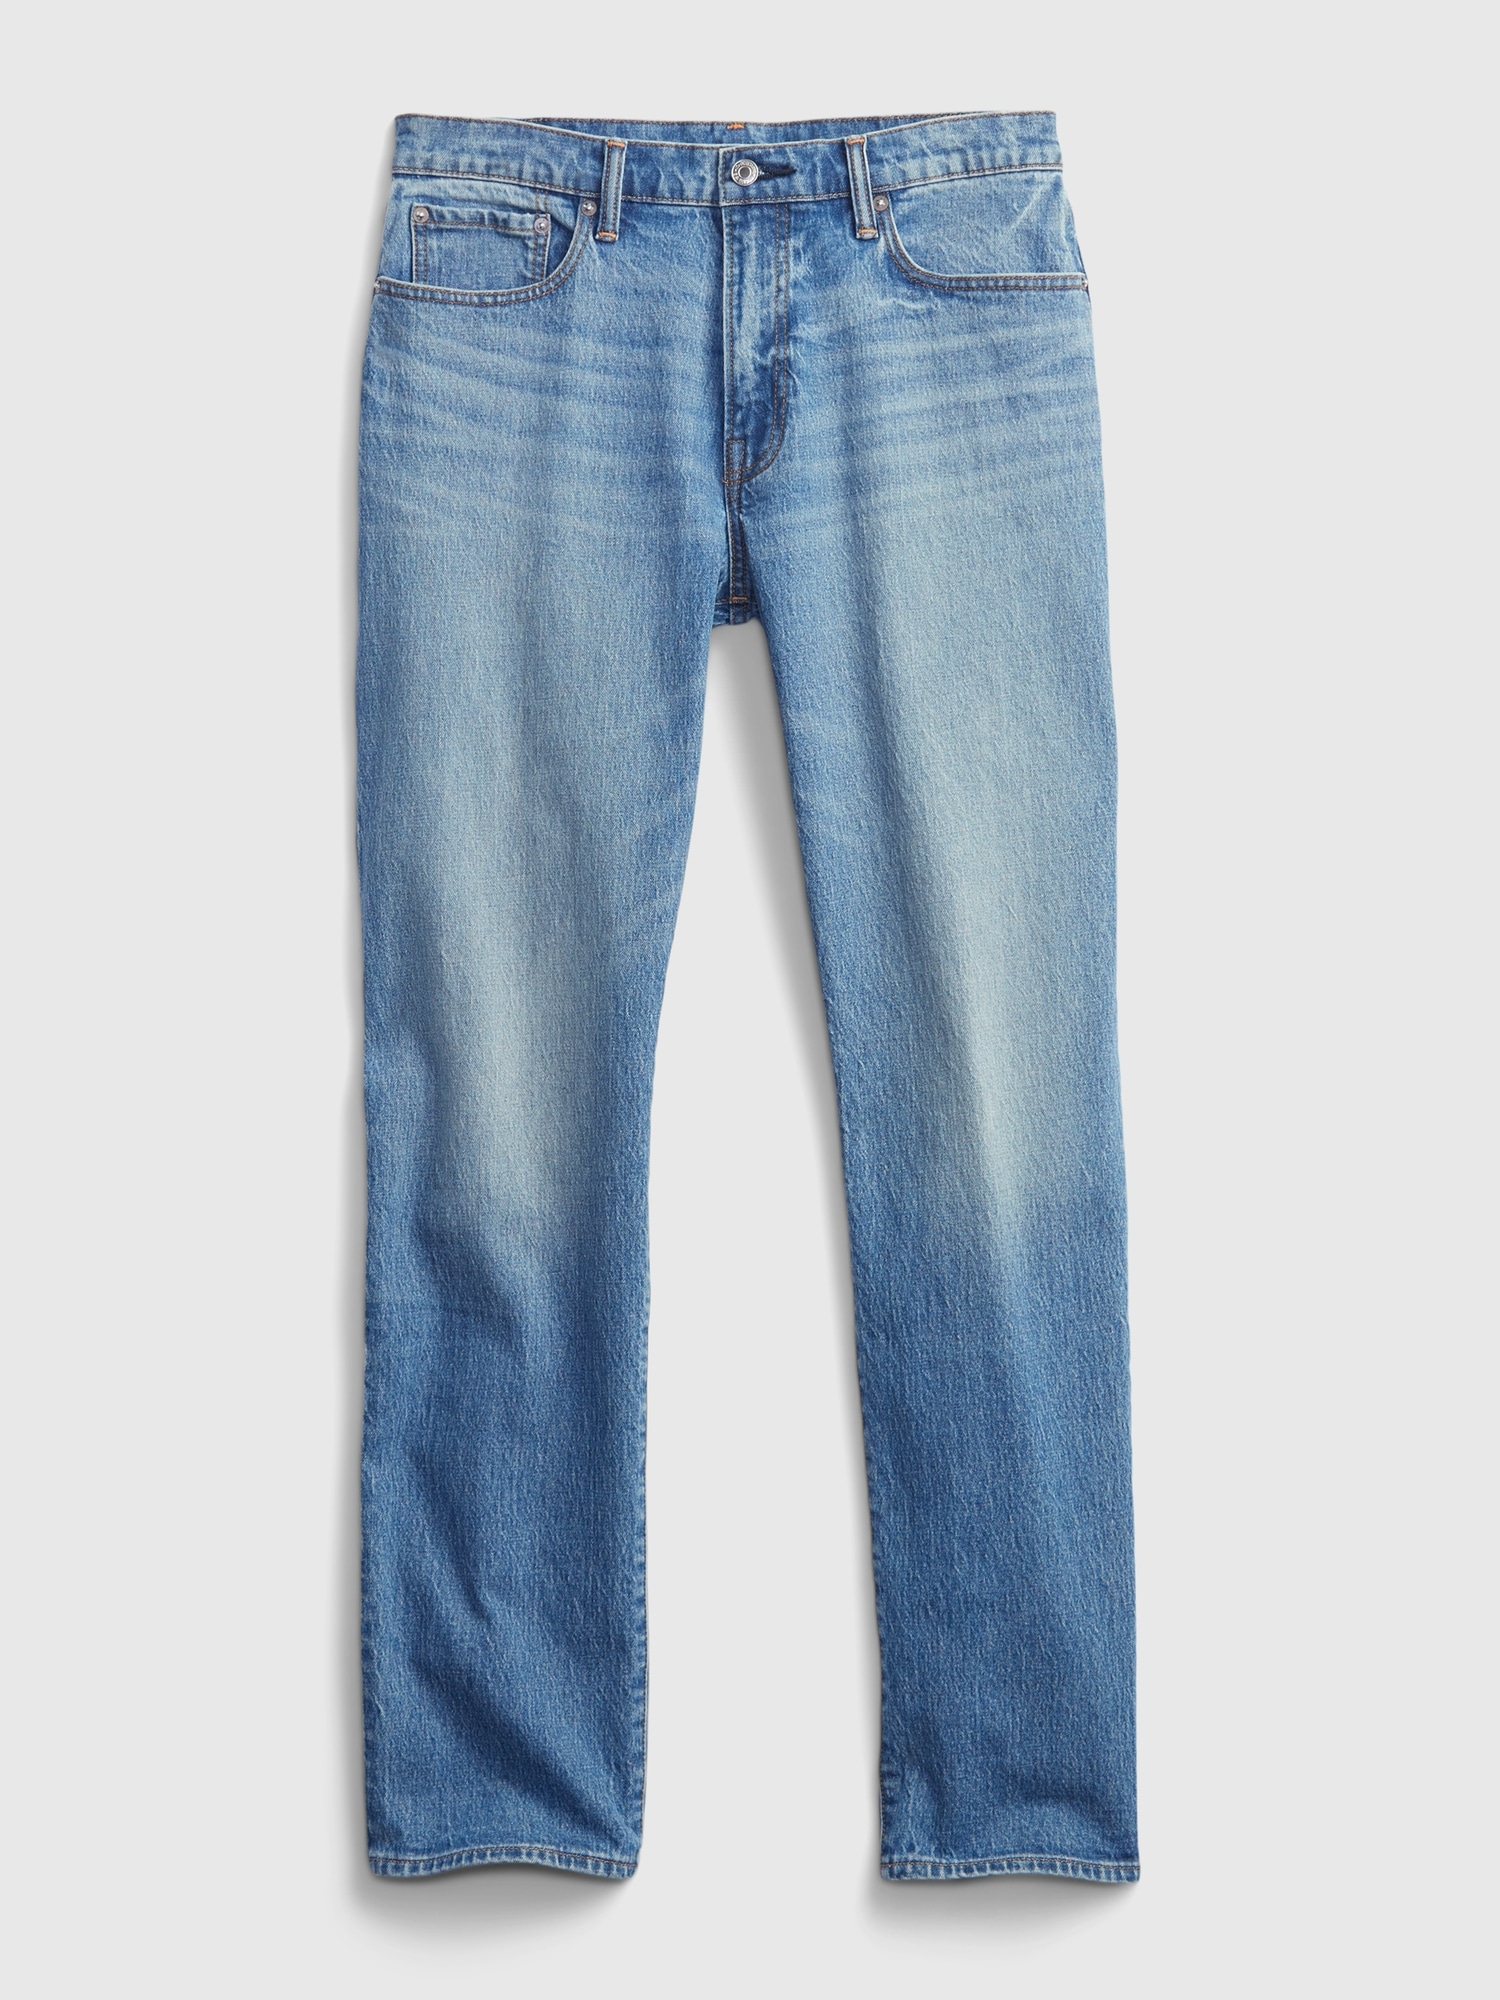 New Gap NAVY straight JEANS with Gapflex 30x34 garment dyed mens